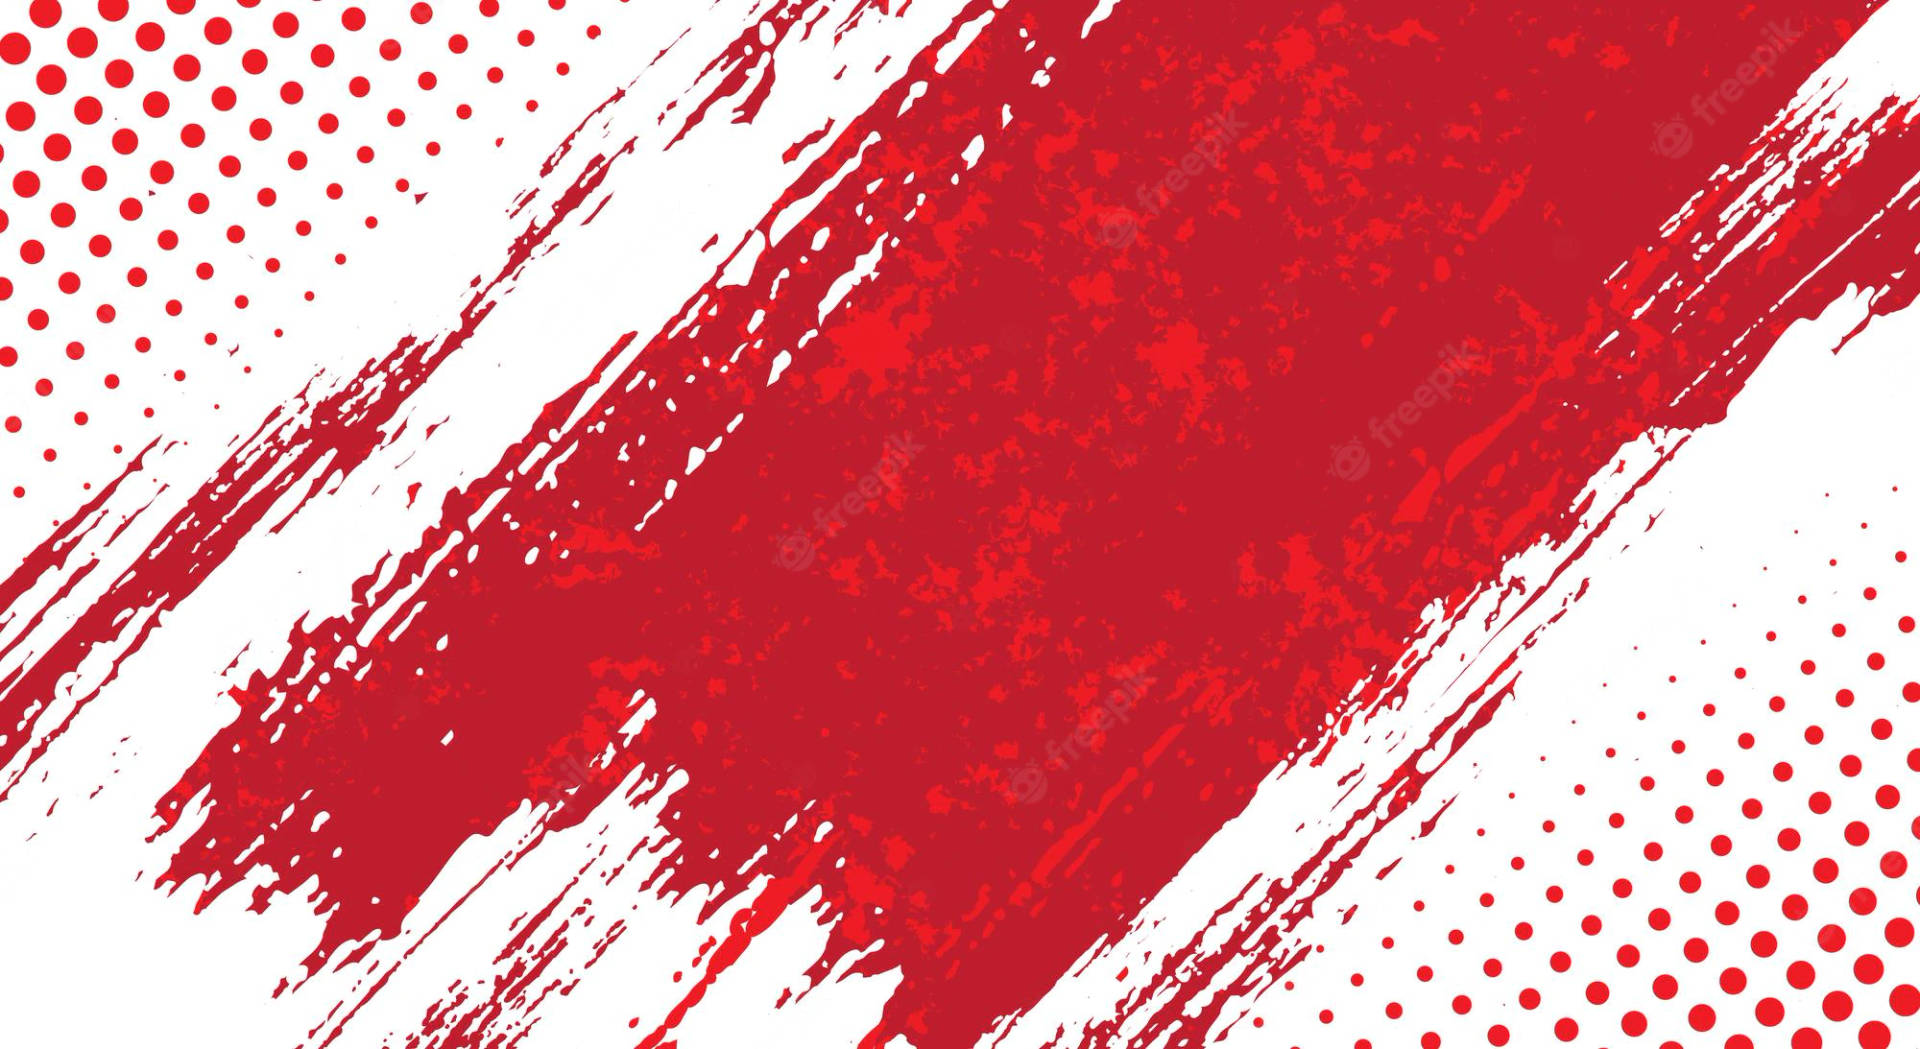 Red And White Grunge Polka Dot Background